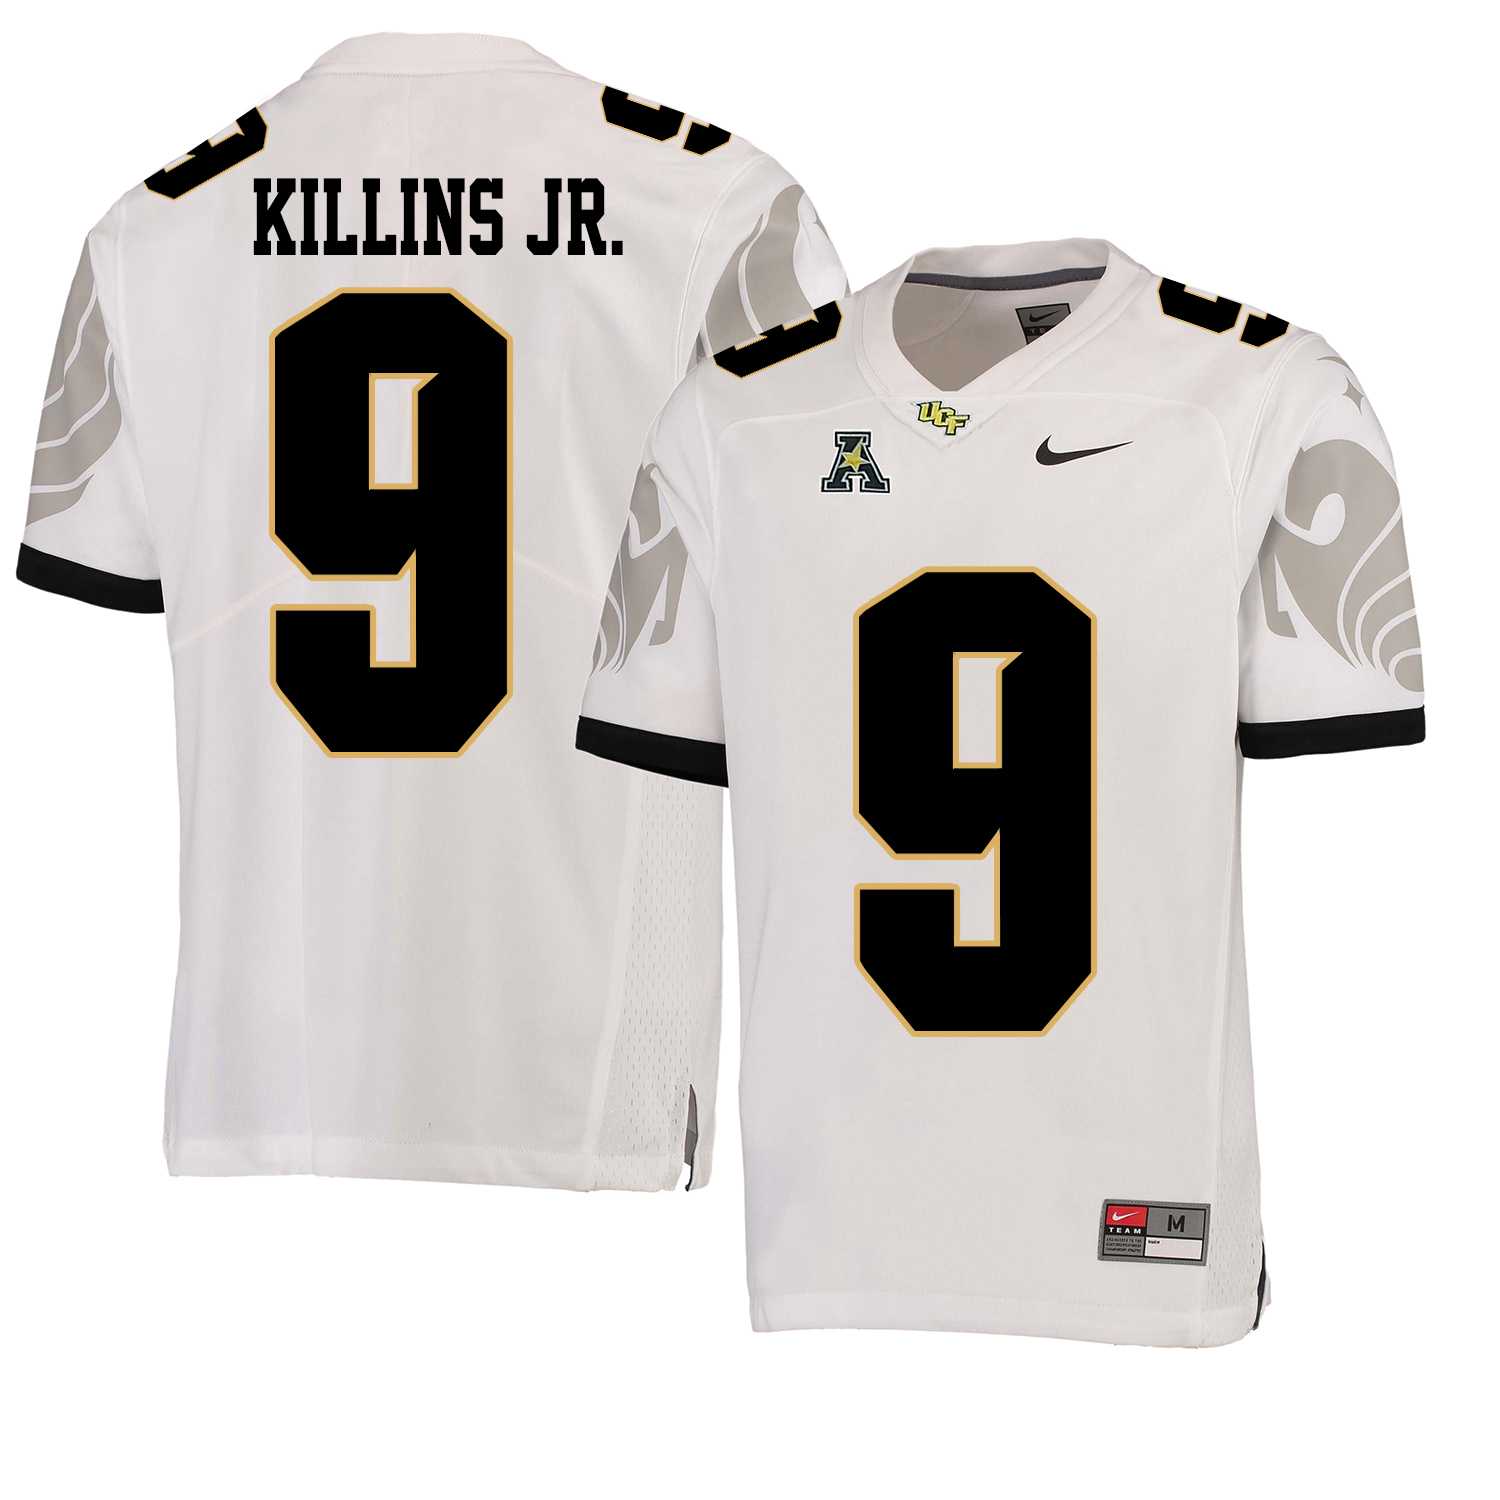 UCF Knights 9 Adrian Killins Jr. White College Football Jersey DingZhi